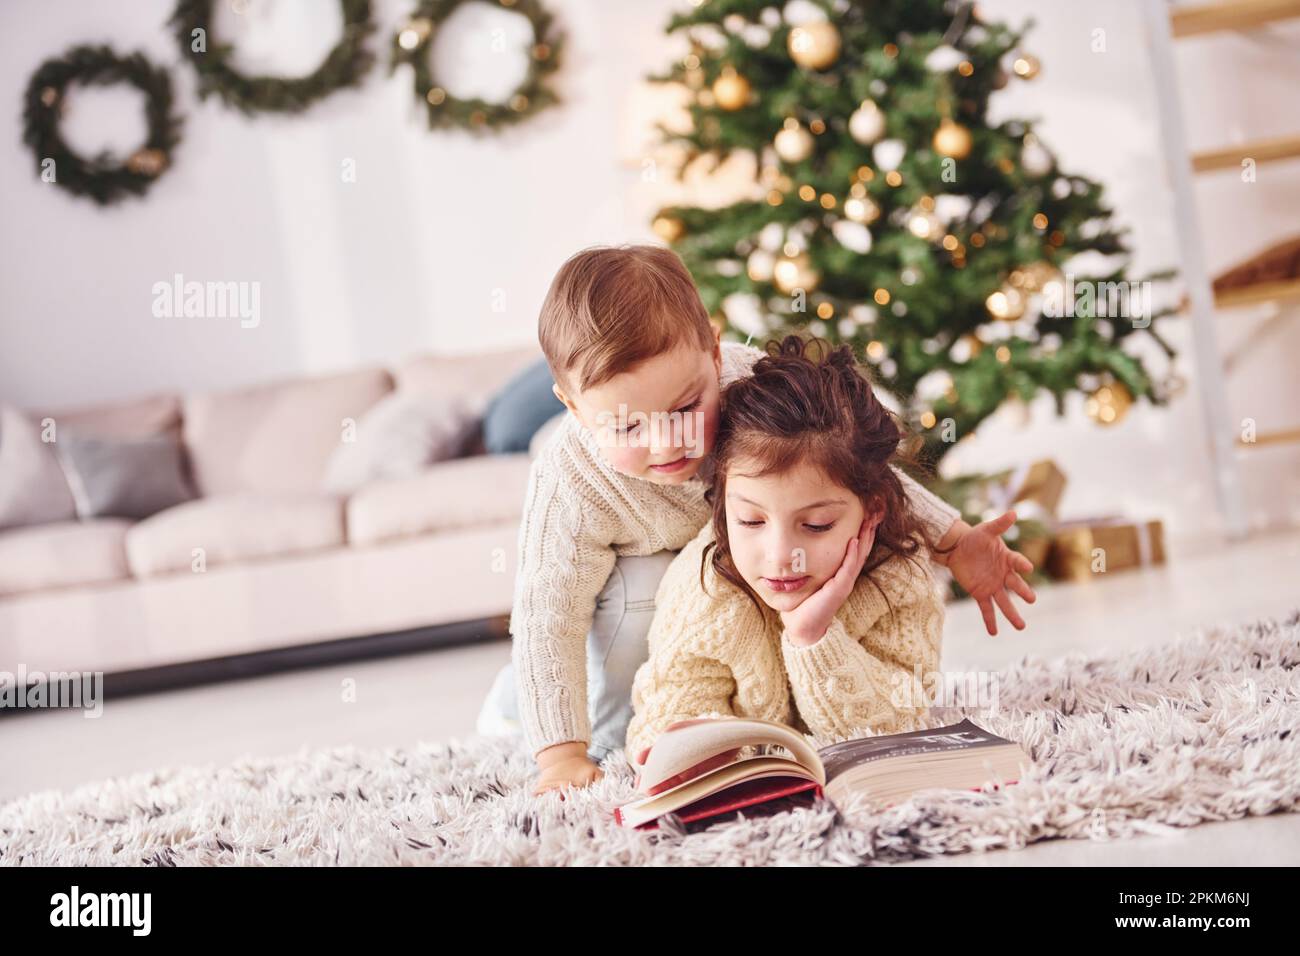 Laying down on the ground. Little brother and sister is at christmas decorated room together. Stock Photo